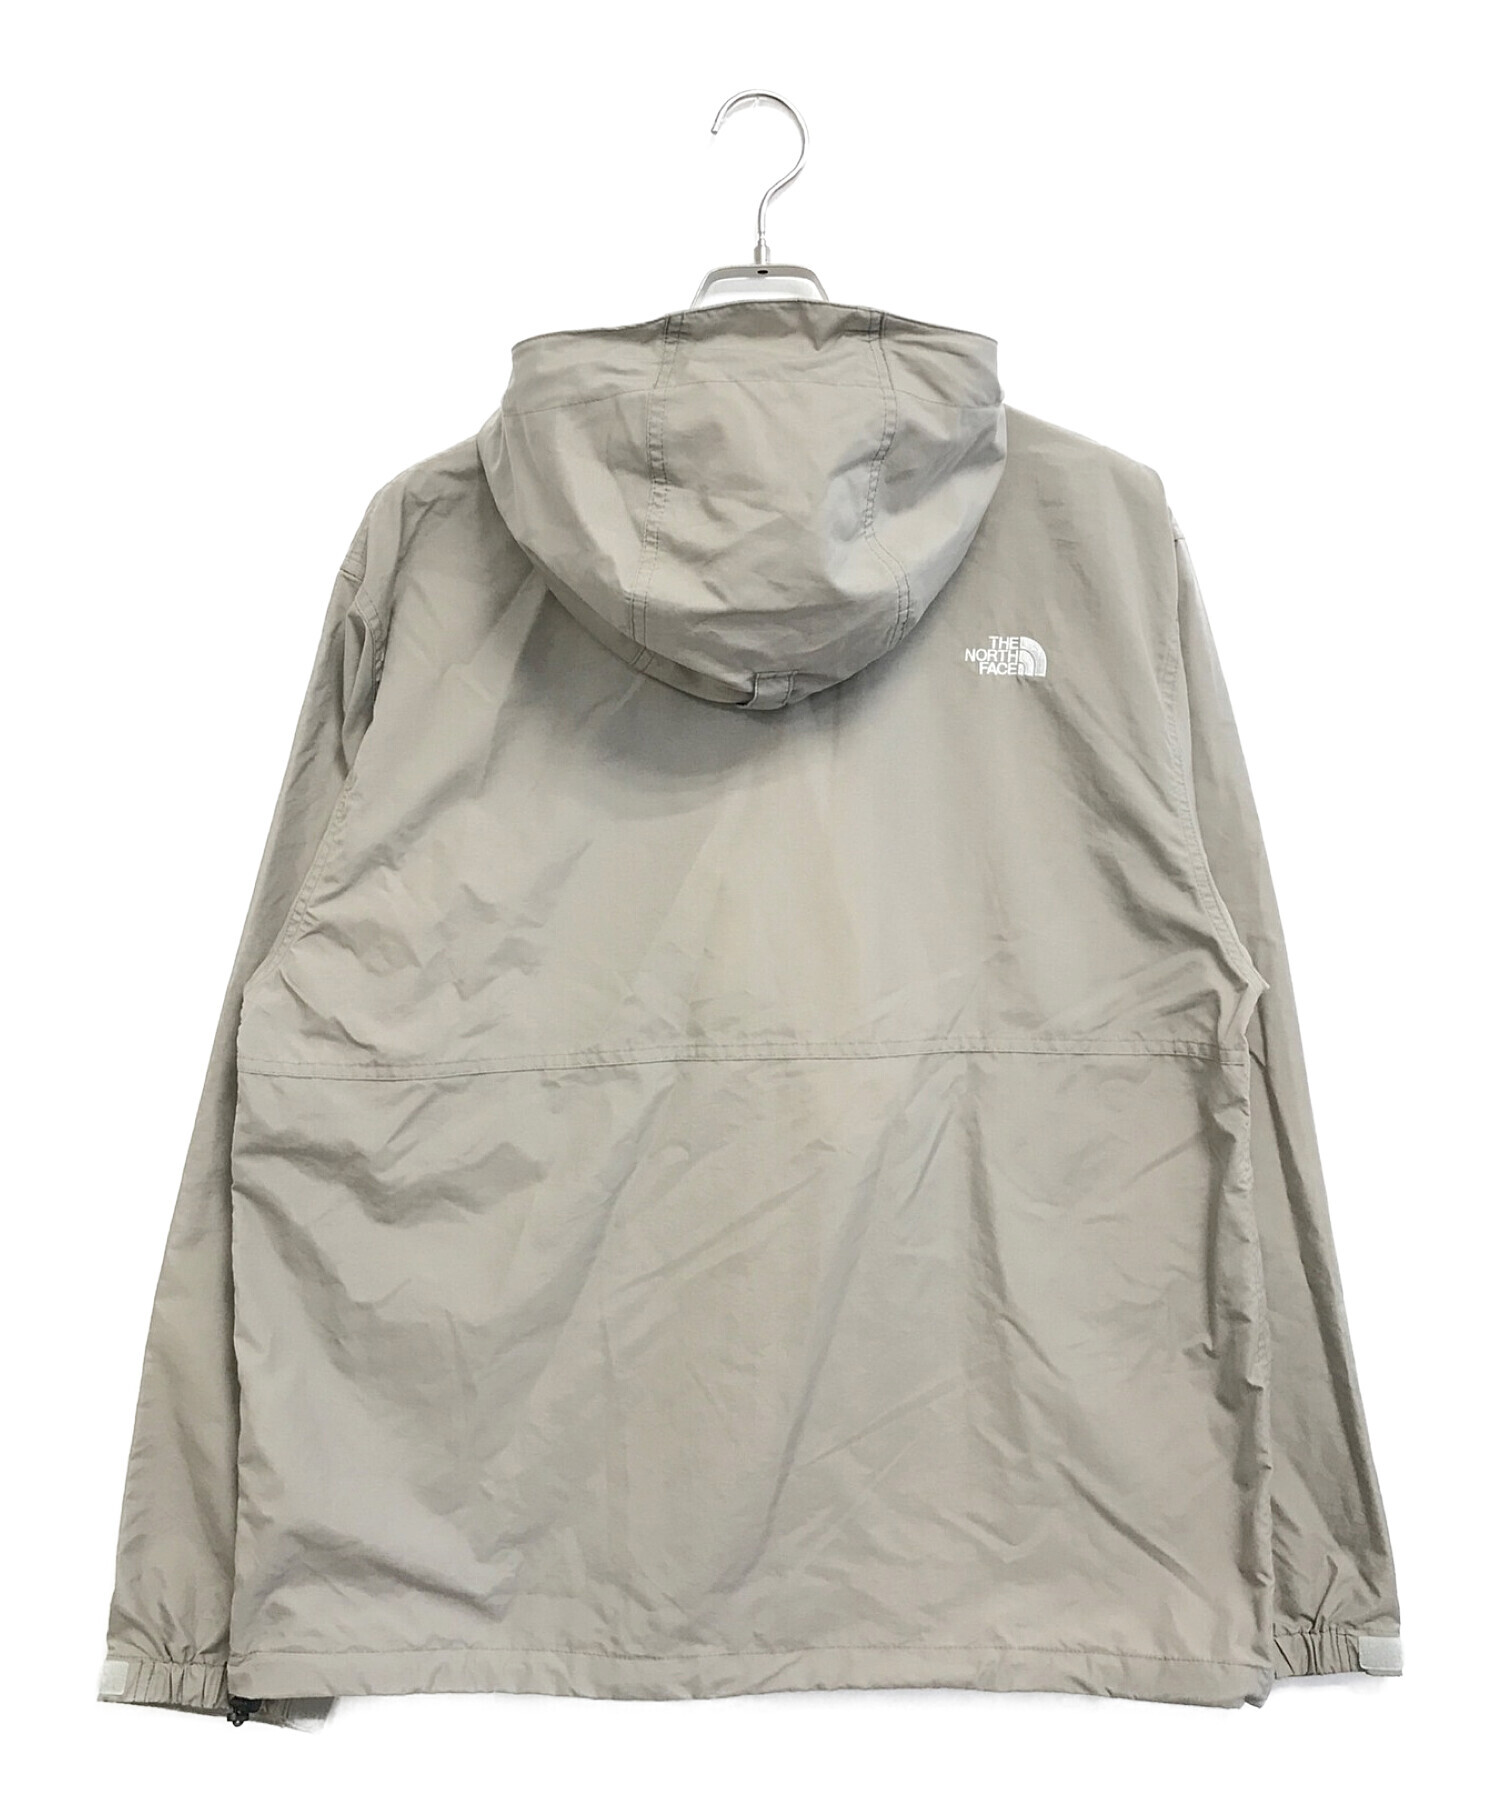 THE NORTH FACE コンパクトジャケット　L 未使用